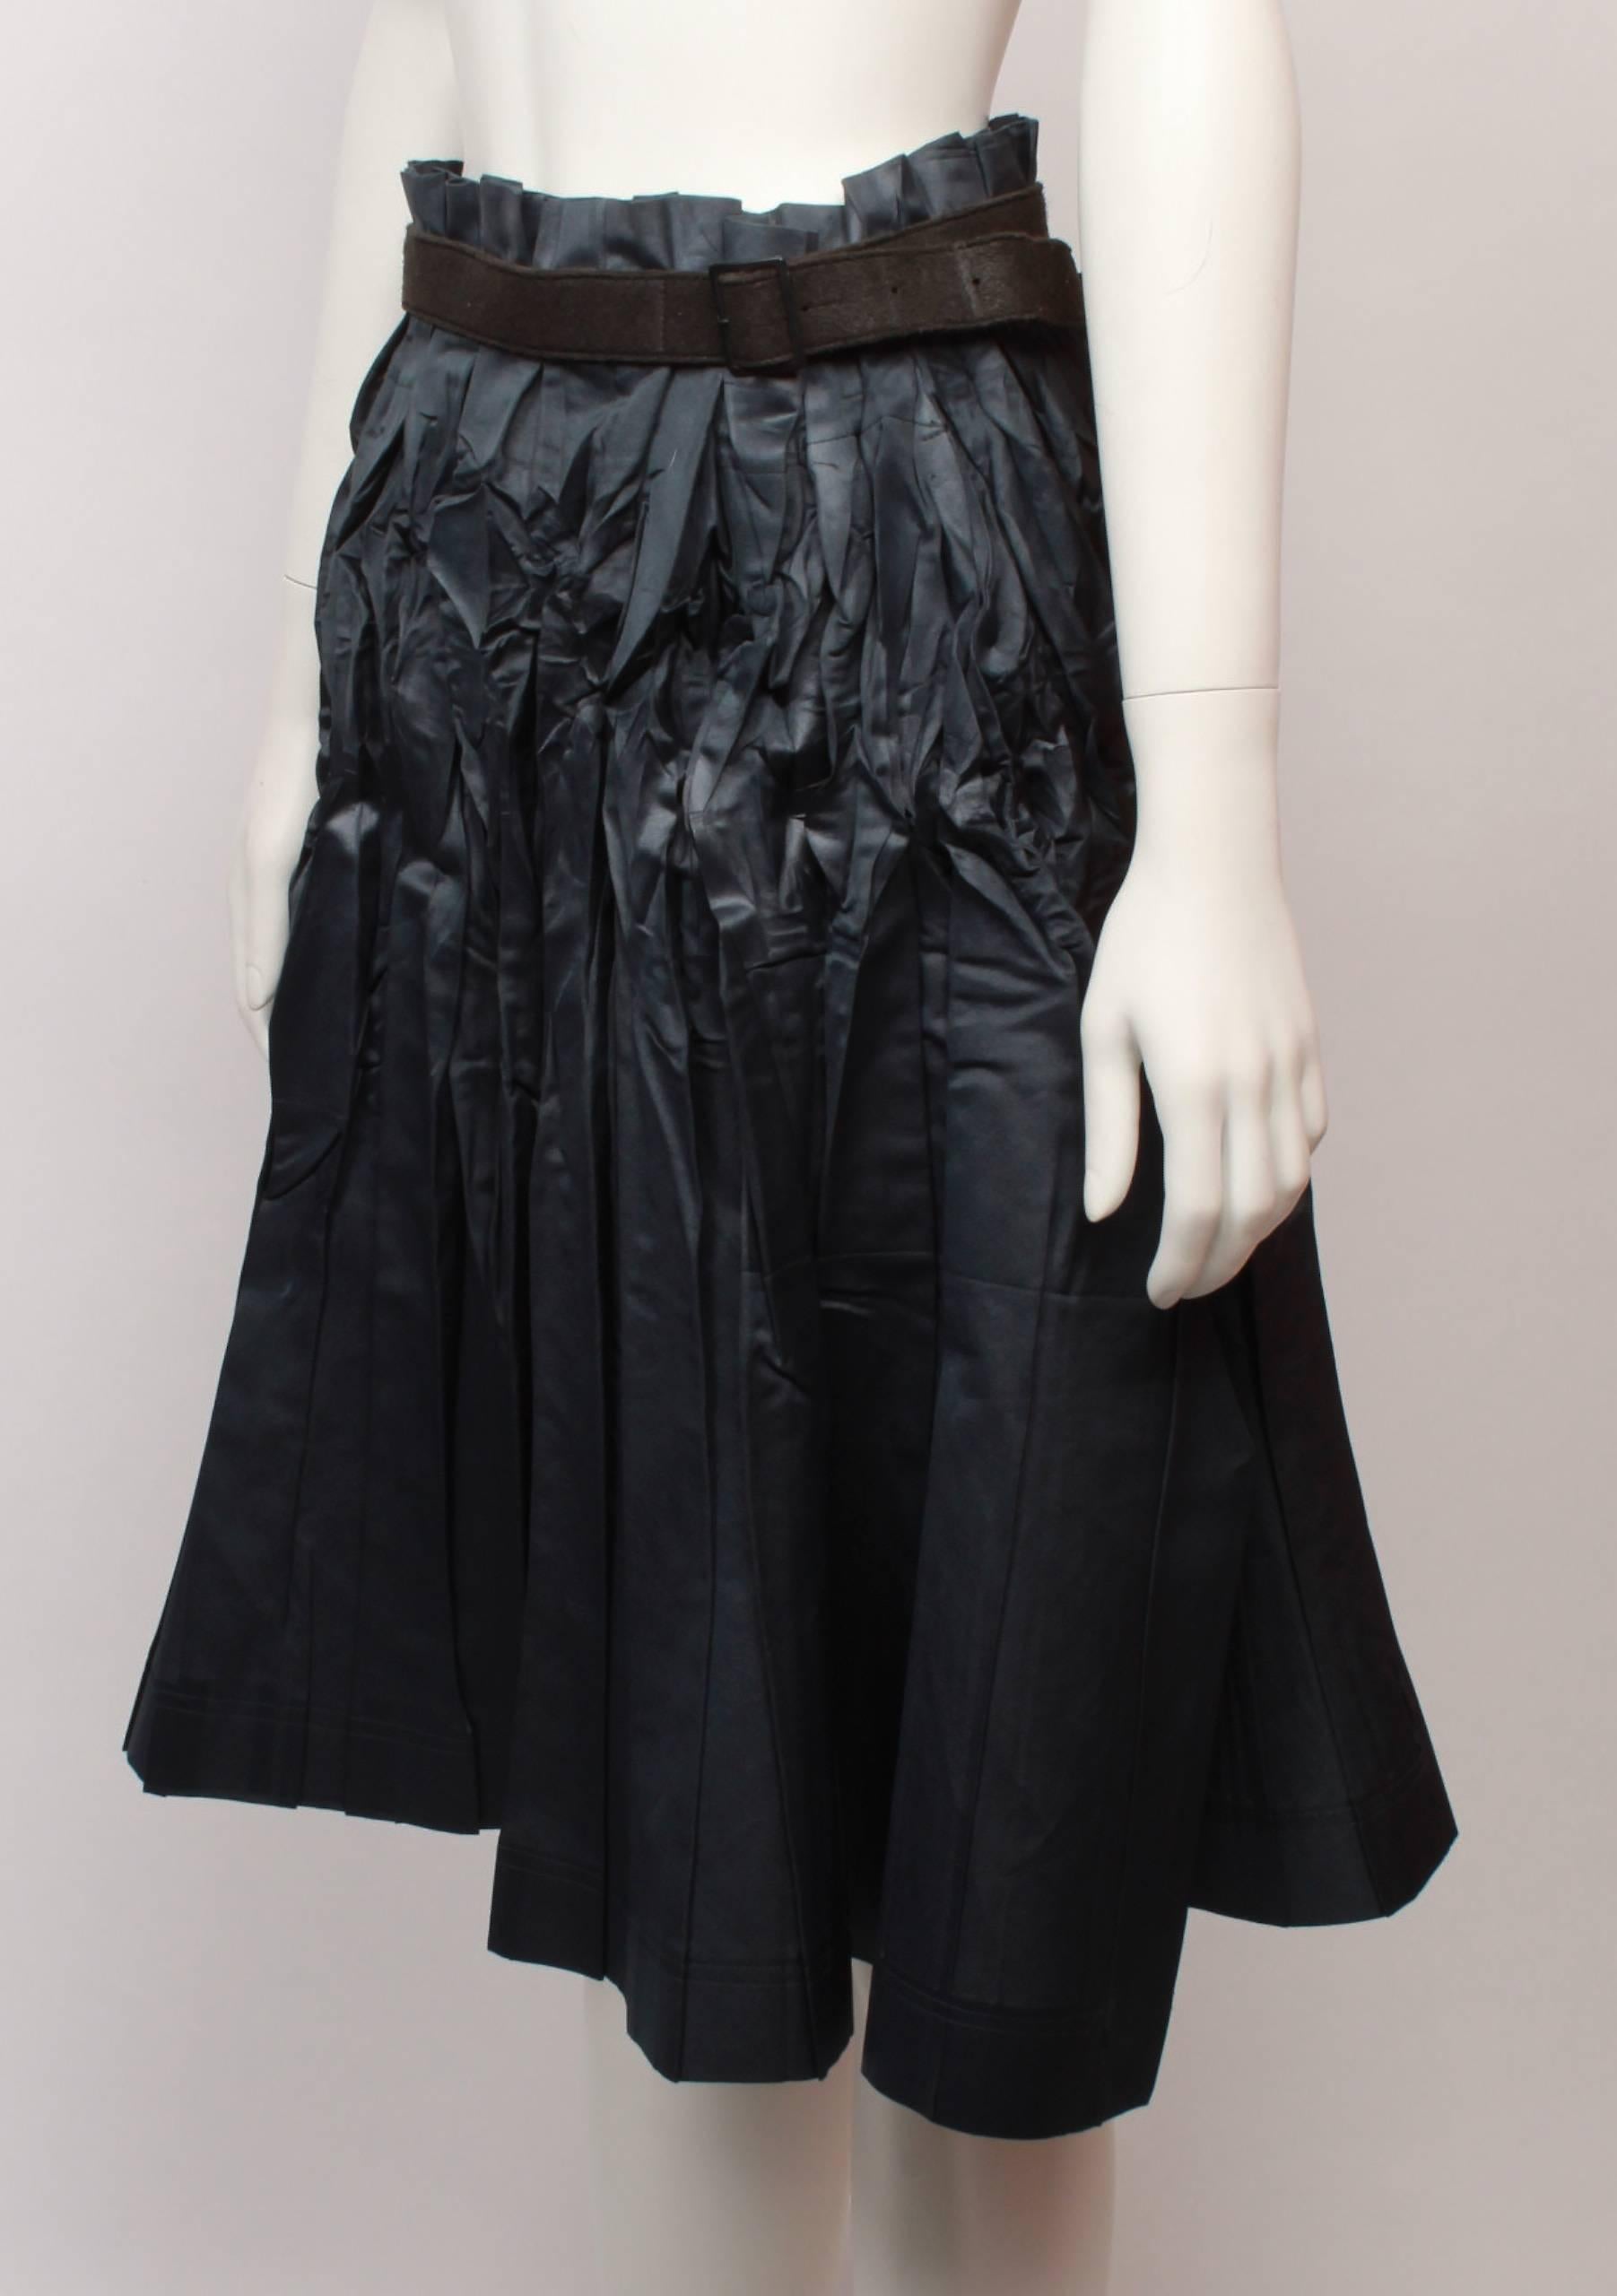 Issey Miyake Loosely Pleated Dark Charcoal satin wrap skirt with belted waistband and kilt style tabs to fasten. 
Satin is crushed and crumpled from the waist to the hip and then softens from the hip to the hemline. 
